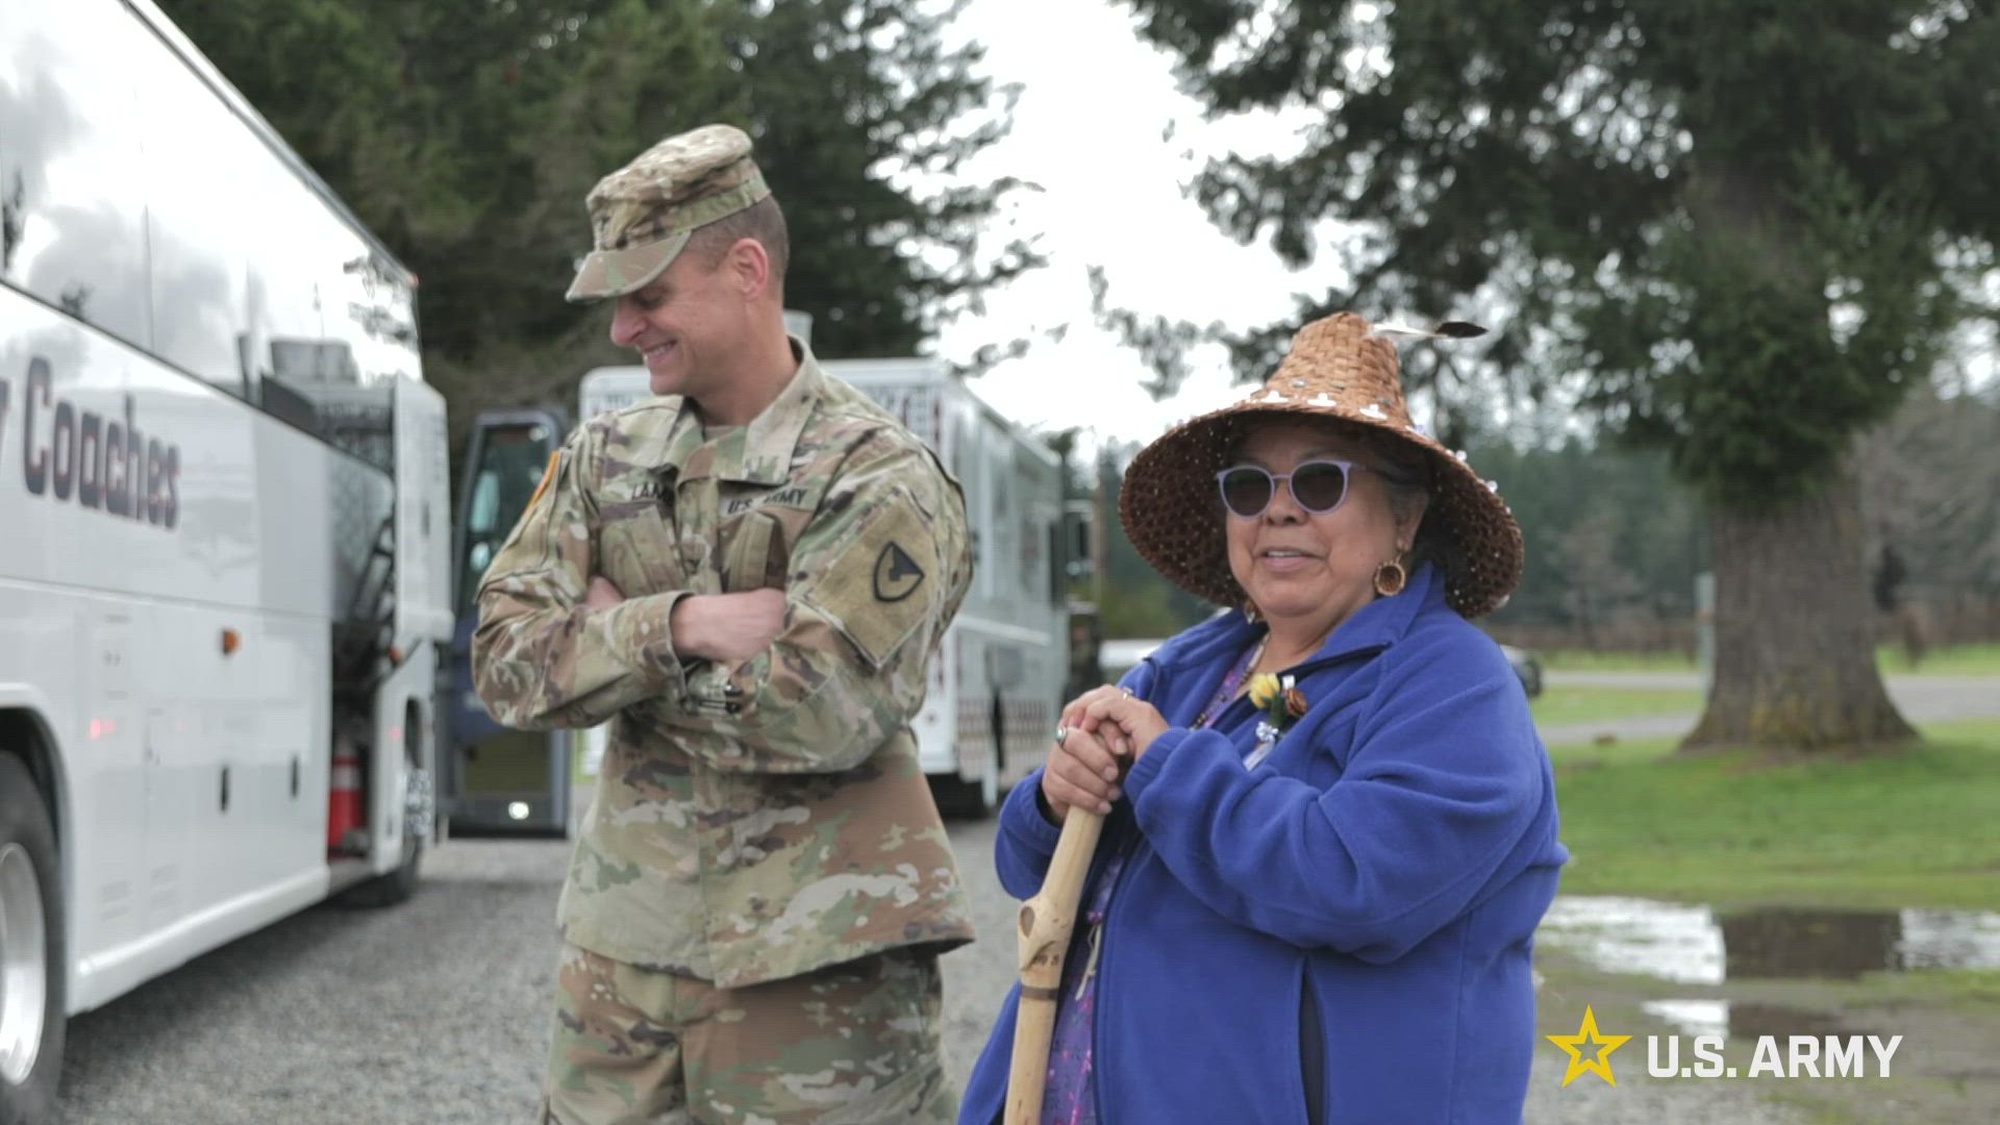 A service member and civilian smile while standing together outdoors.